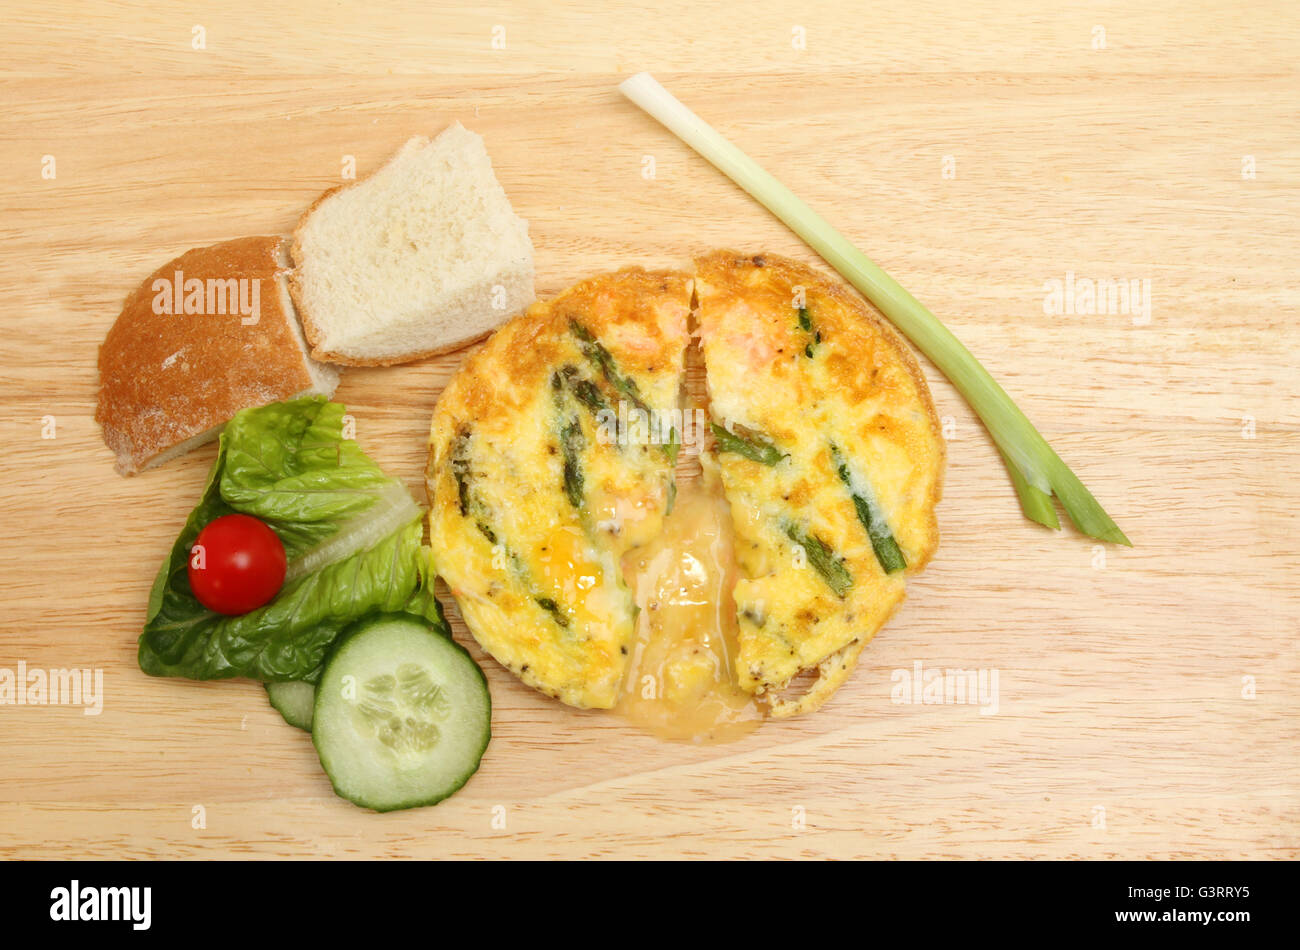 Asparagus and cheese Frittata with salad and crusty bread on a wooden chopping board Stock Photo